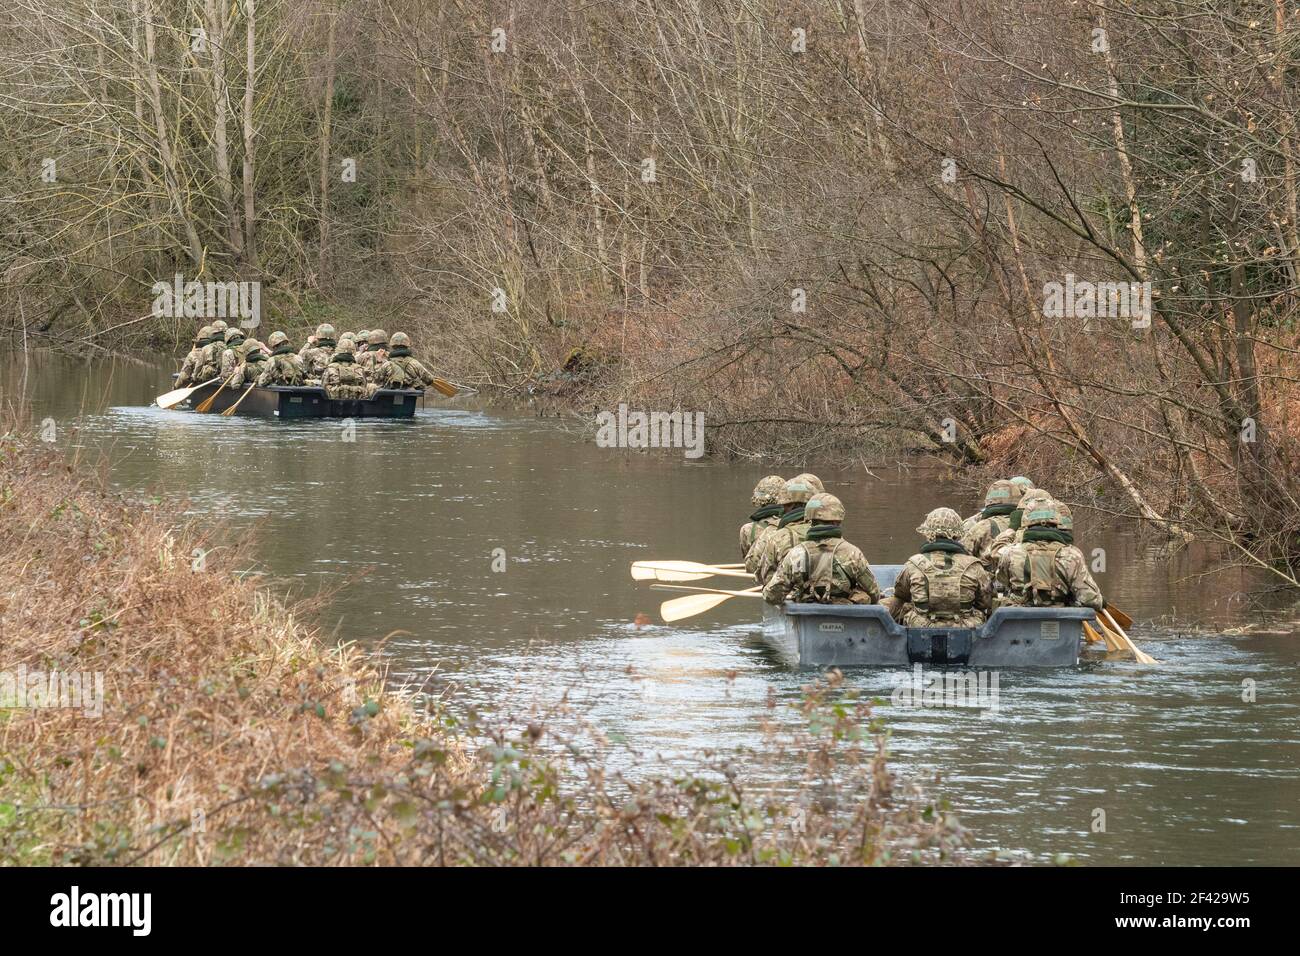 British army on a military training exercise in rowing boats on a canal, Hampshire, UK Stock Photo